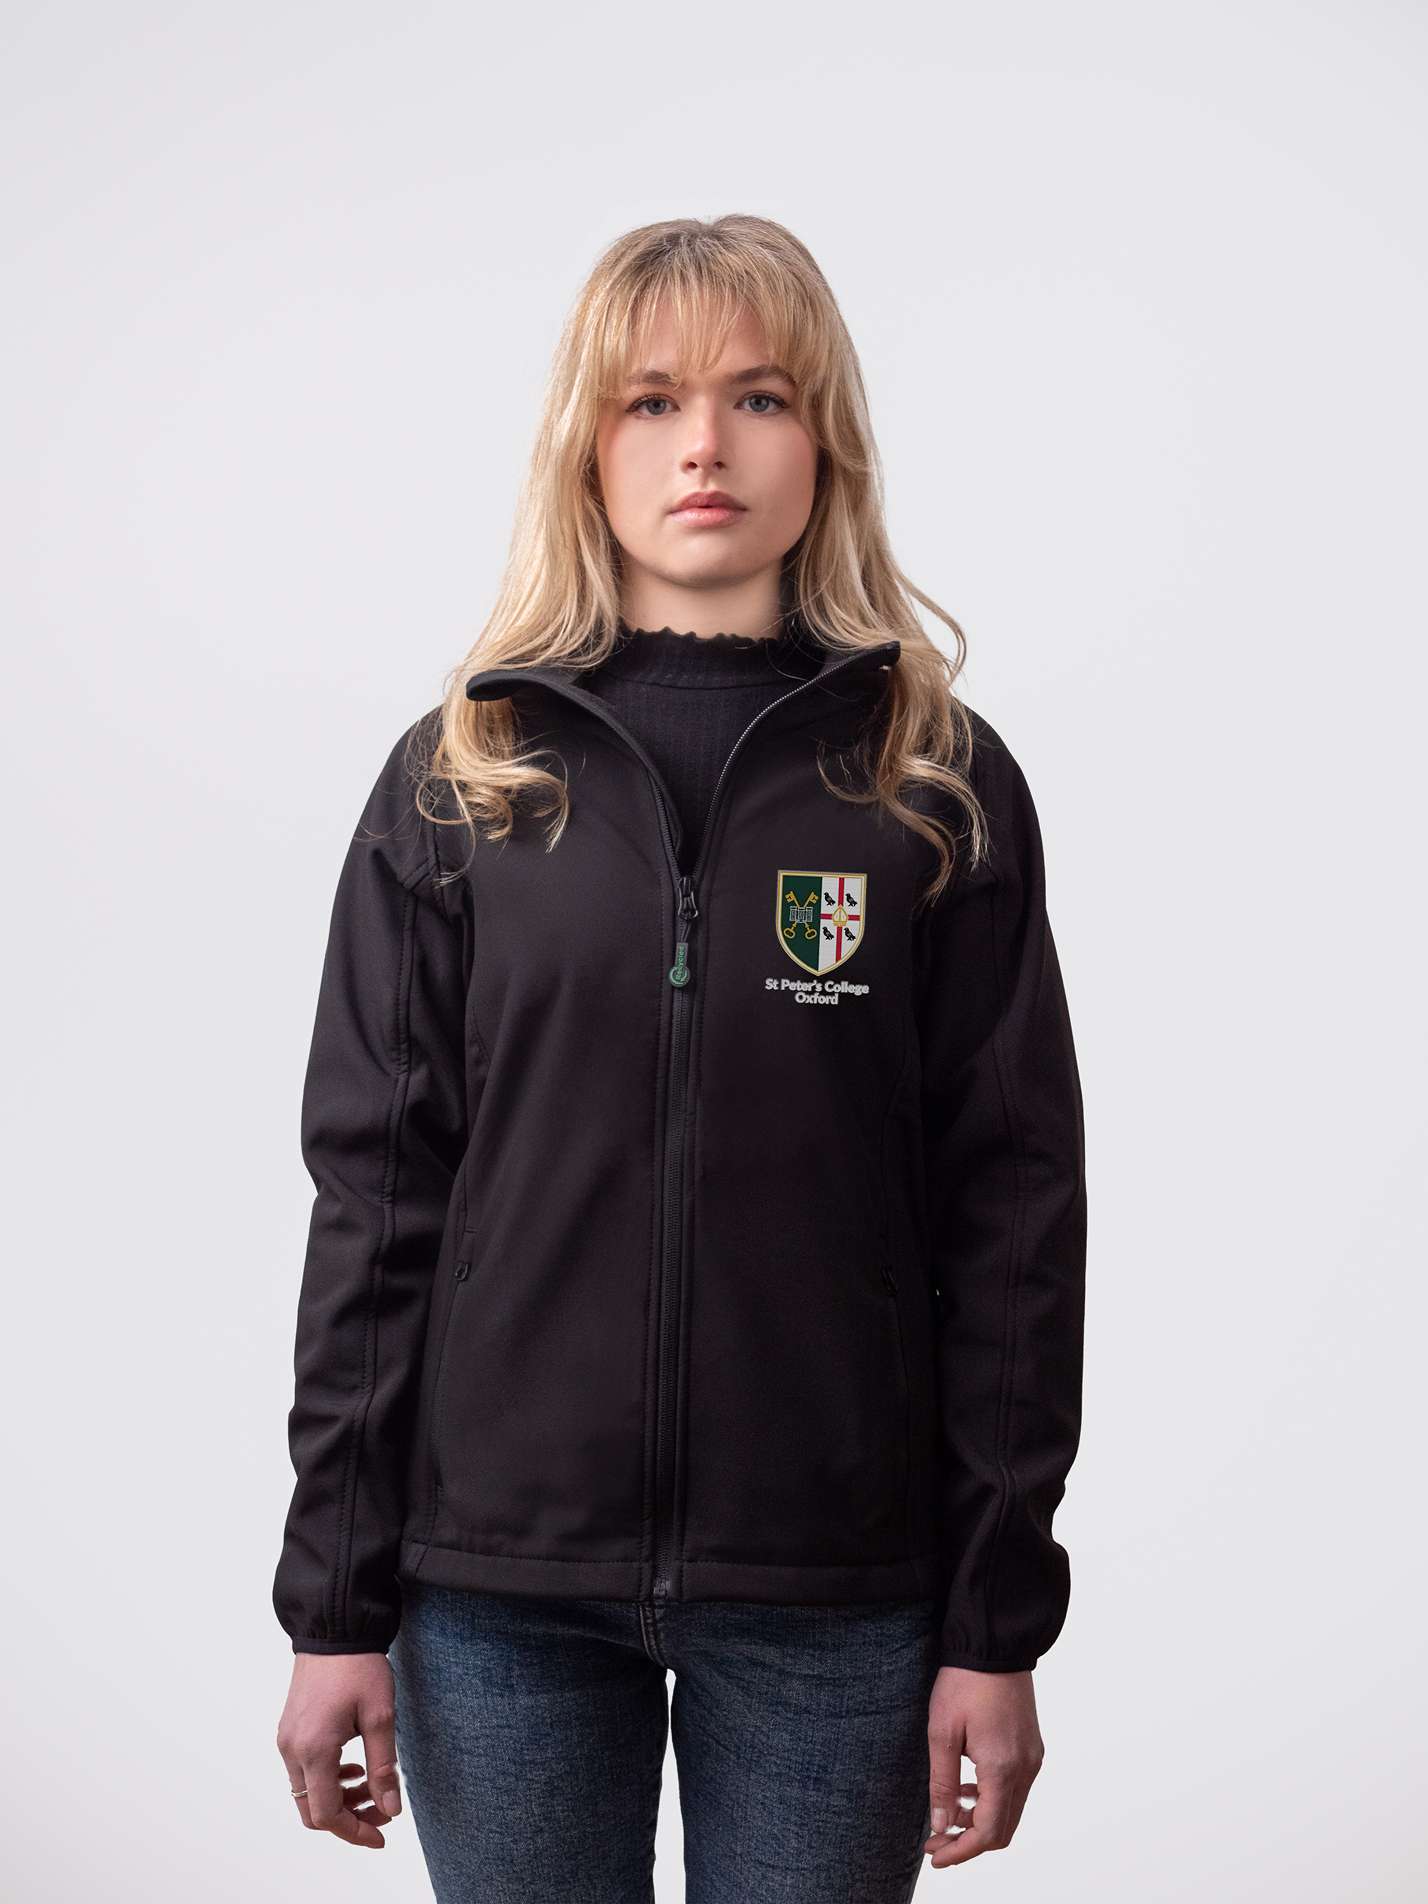 A student wearing a sustainable, St Peter's College embroidered jacket